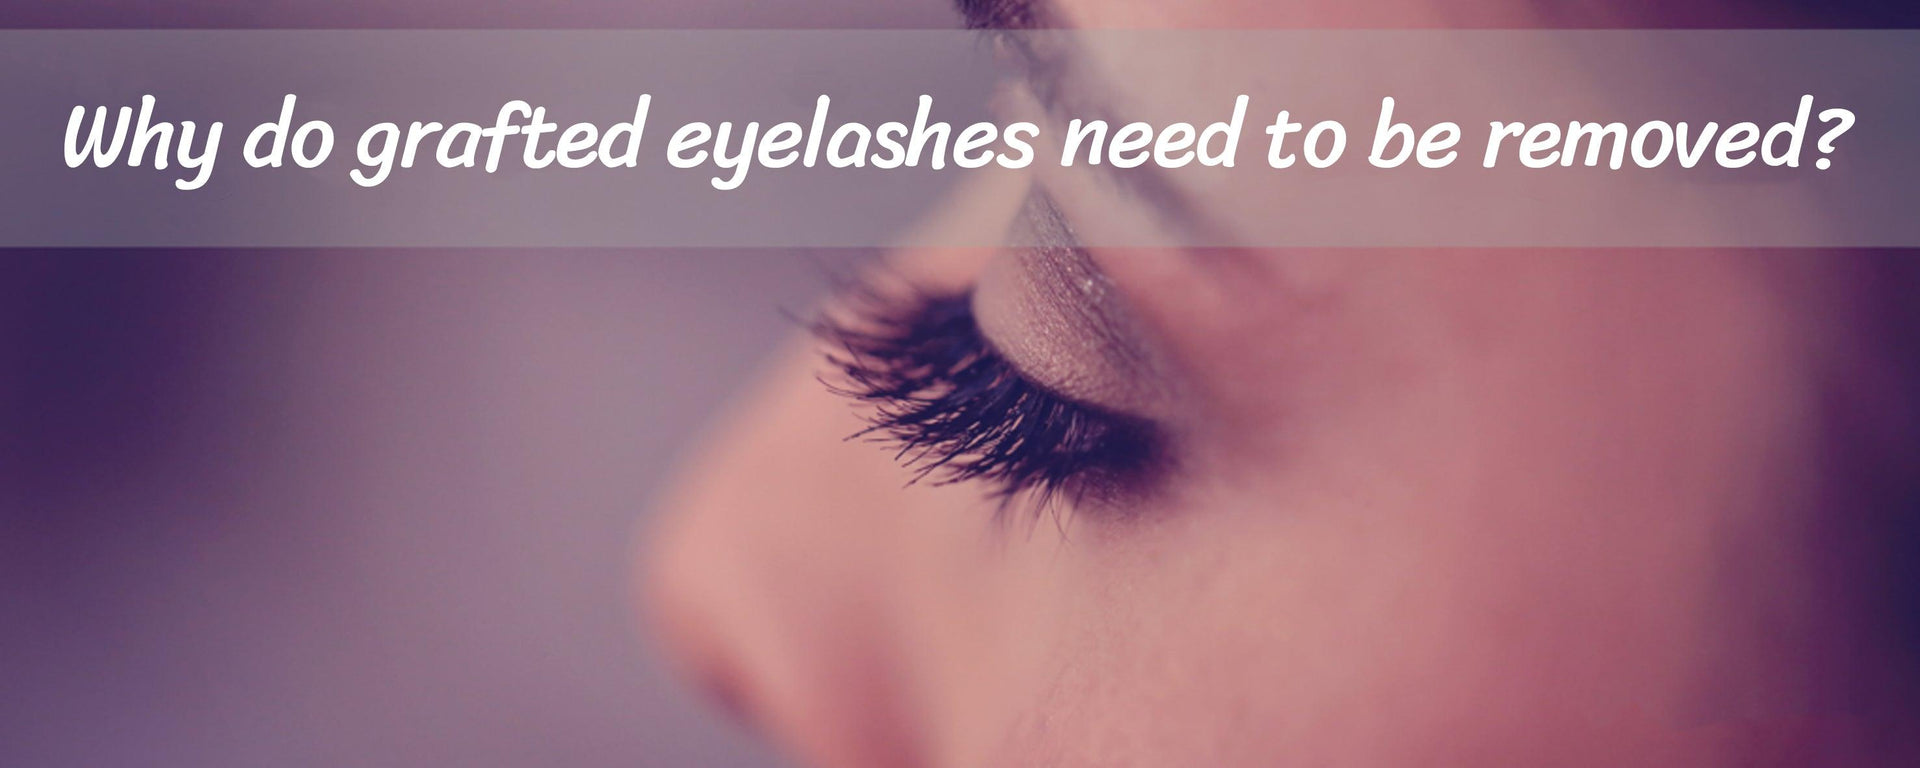 Why Do Grafted Eyelashes Need To Be Removed? - VAVALASH